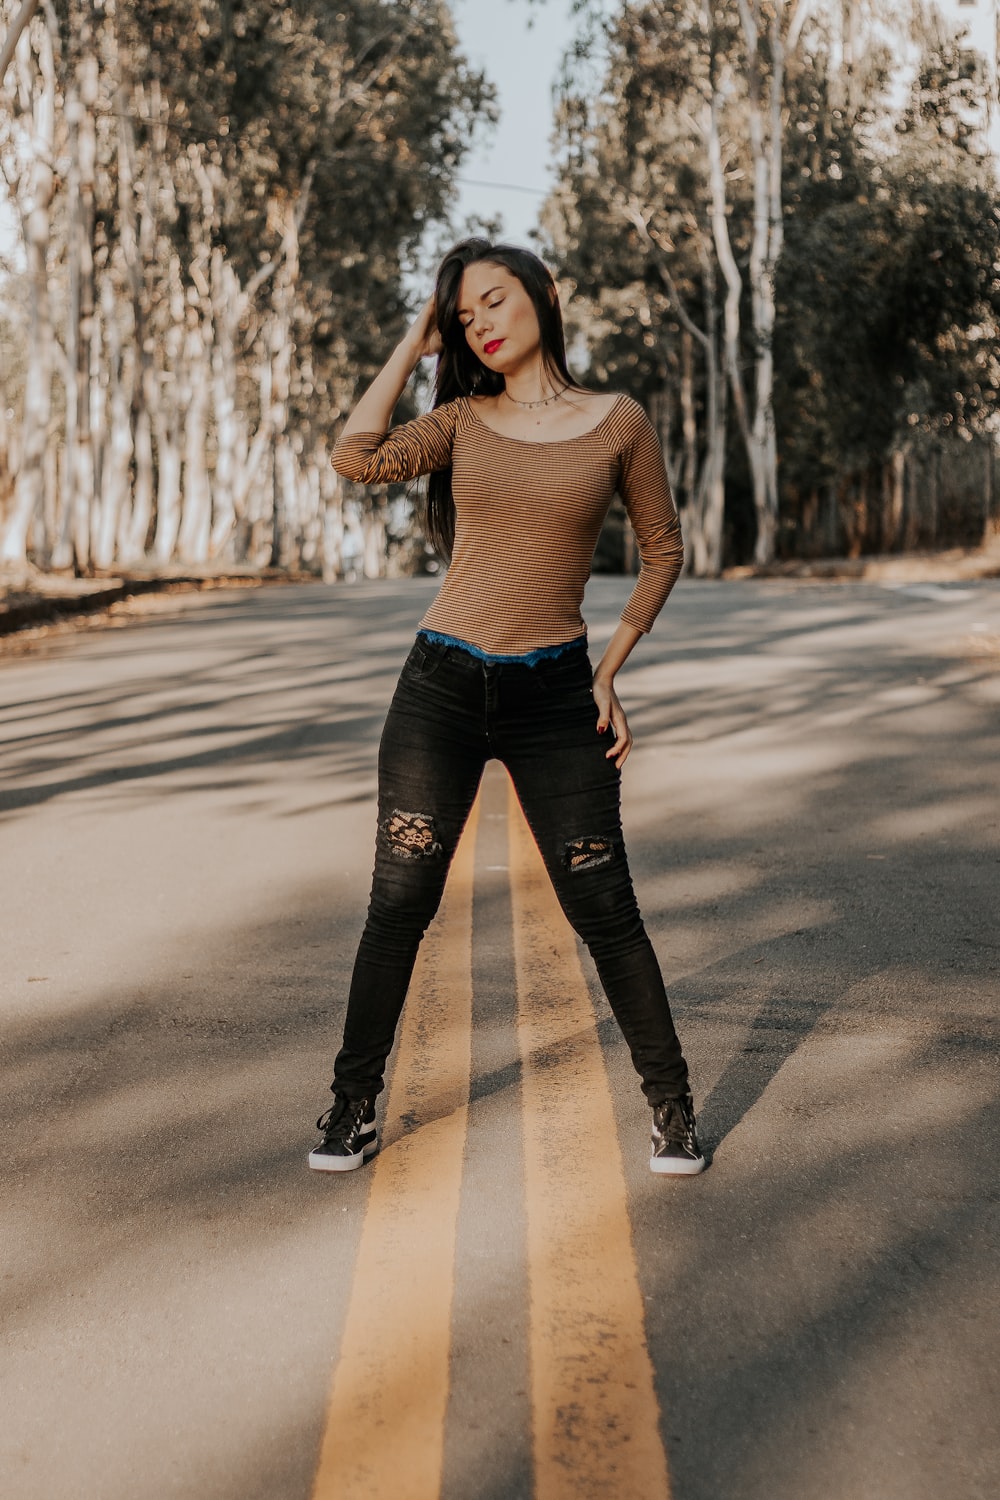 woman in brown tank top and black leggings standing on road during daytime